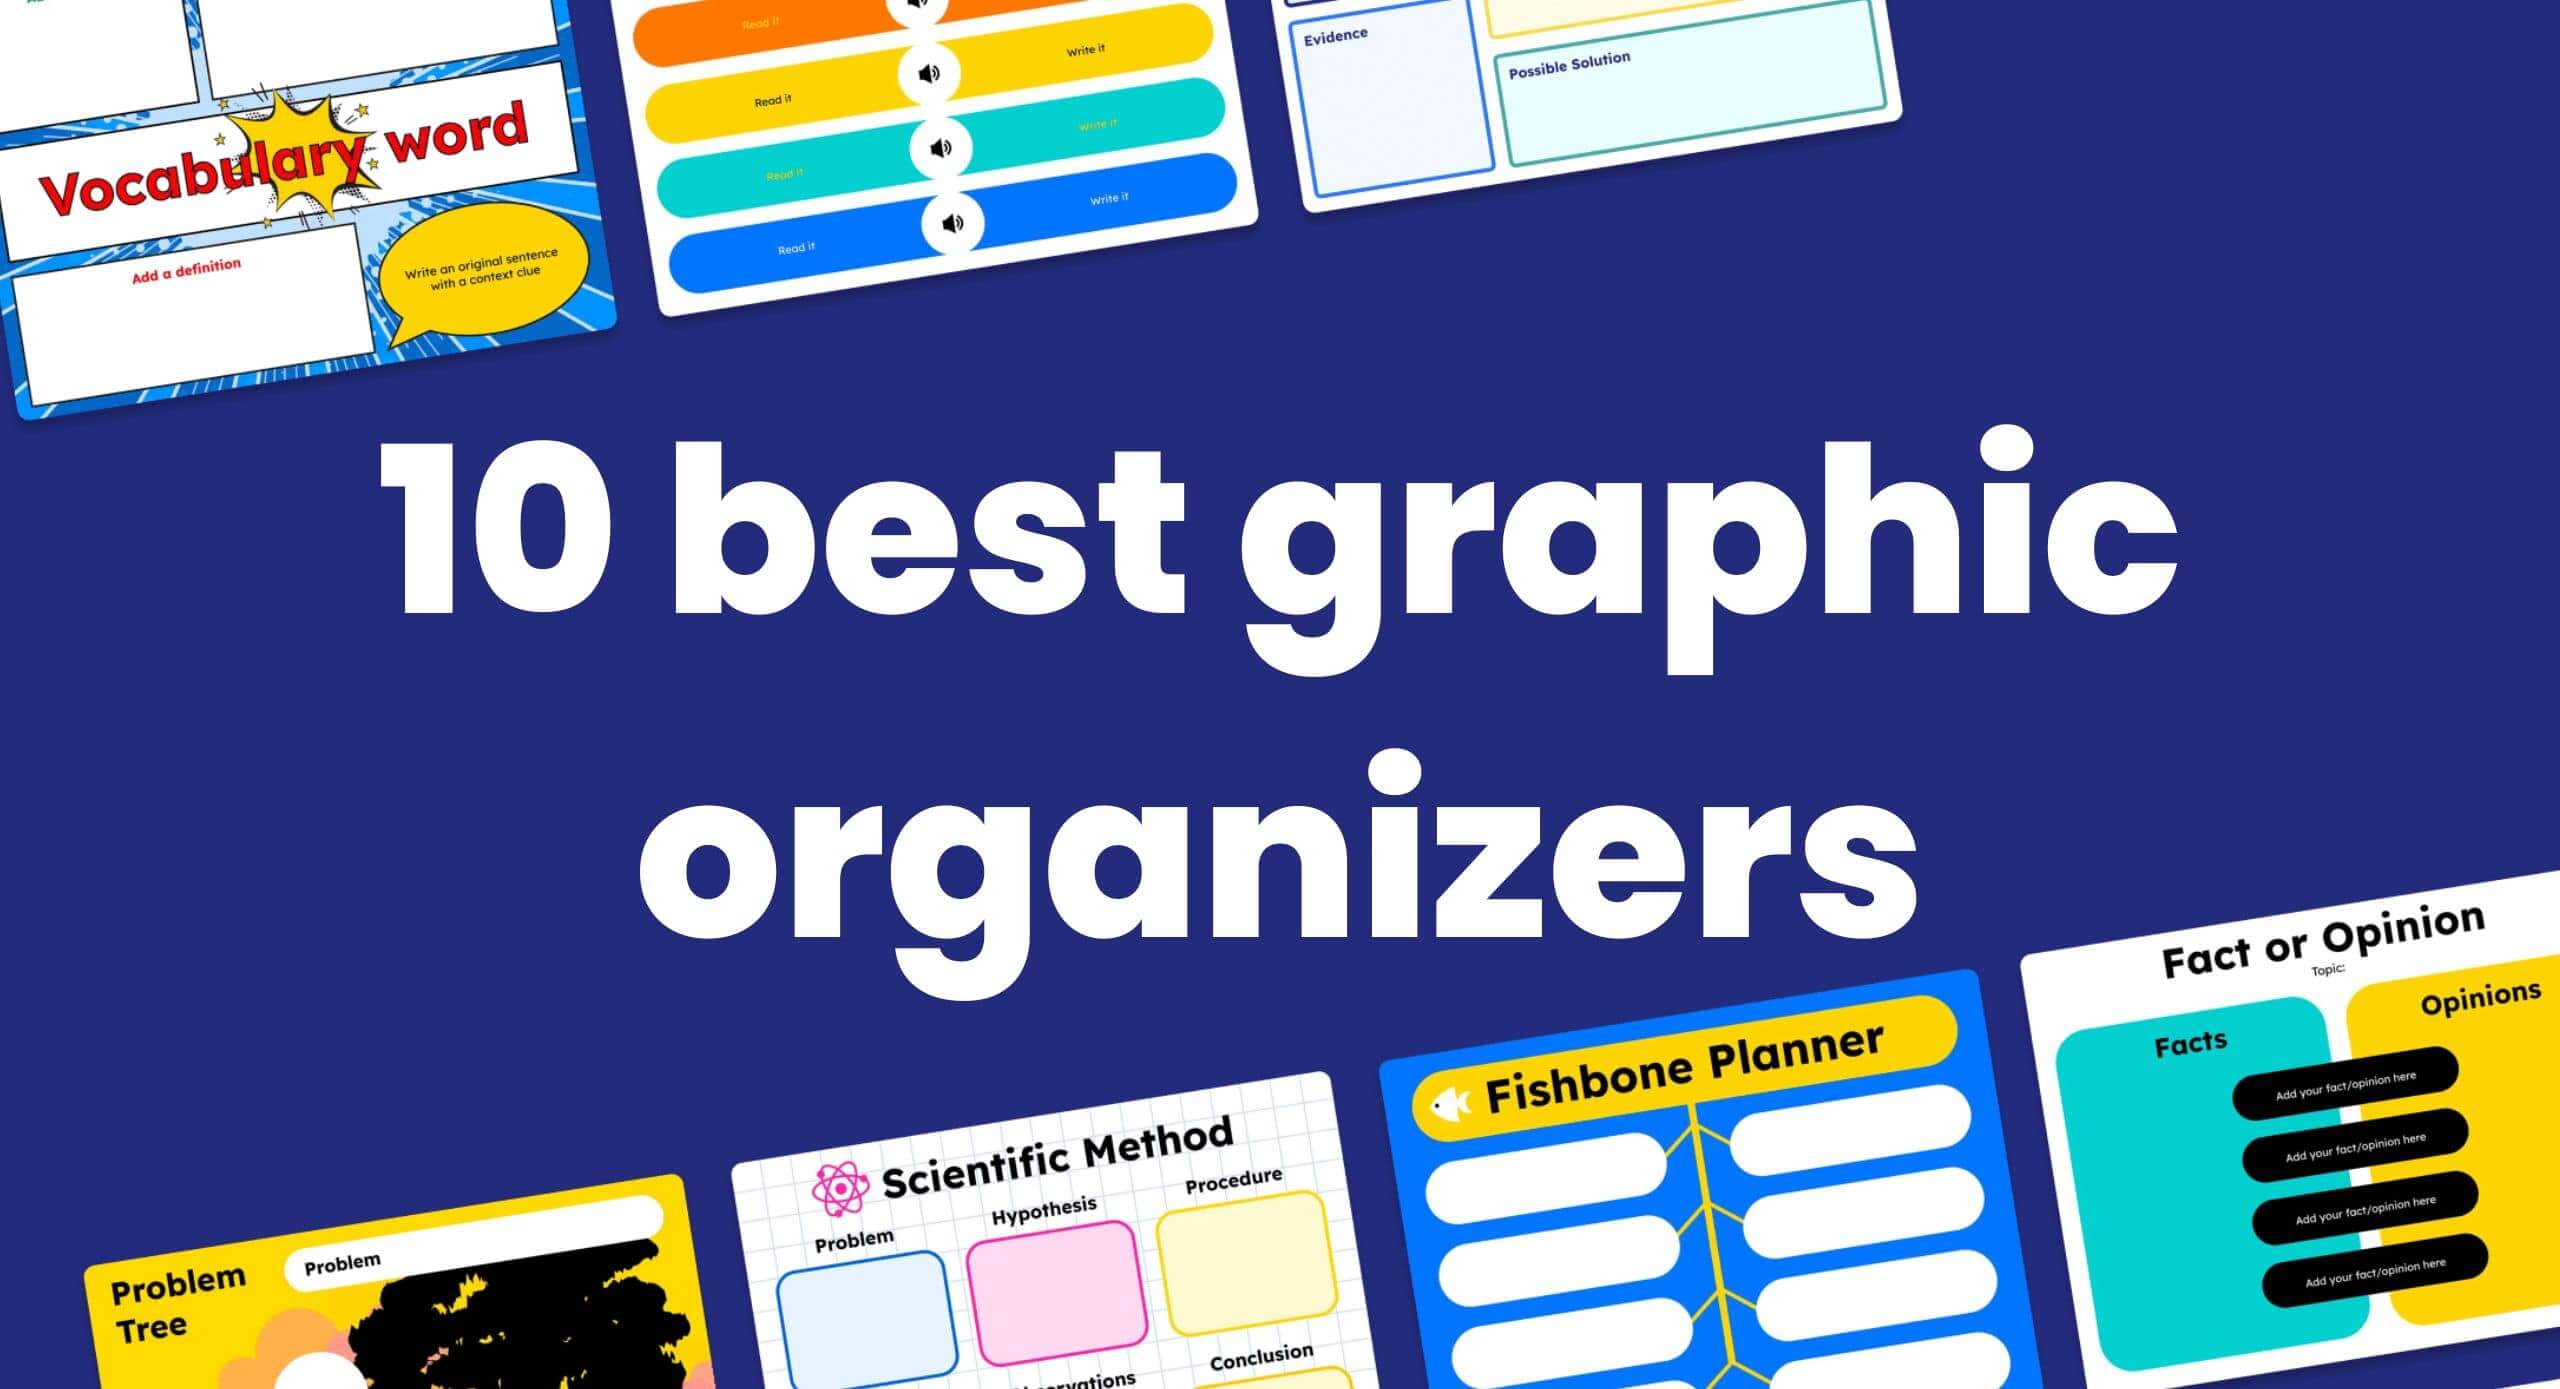 Featured image for “10 best graphic organizers for Teachers”